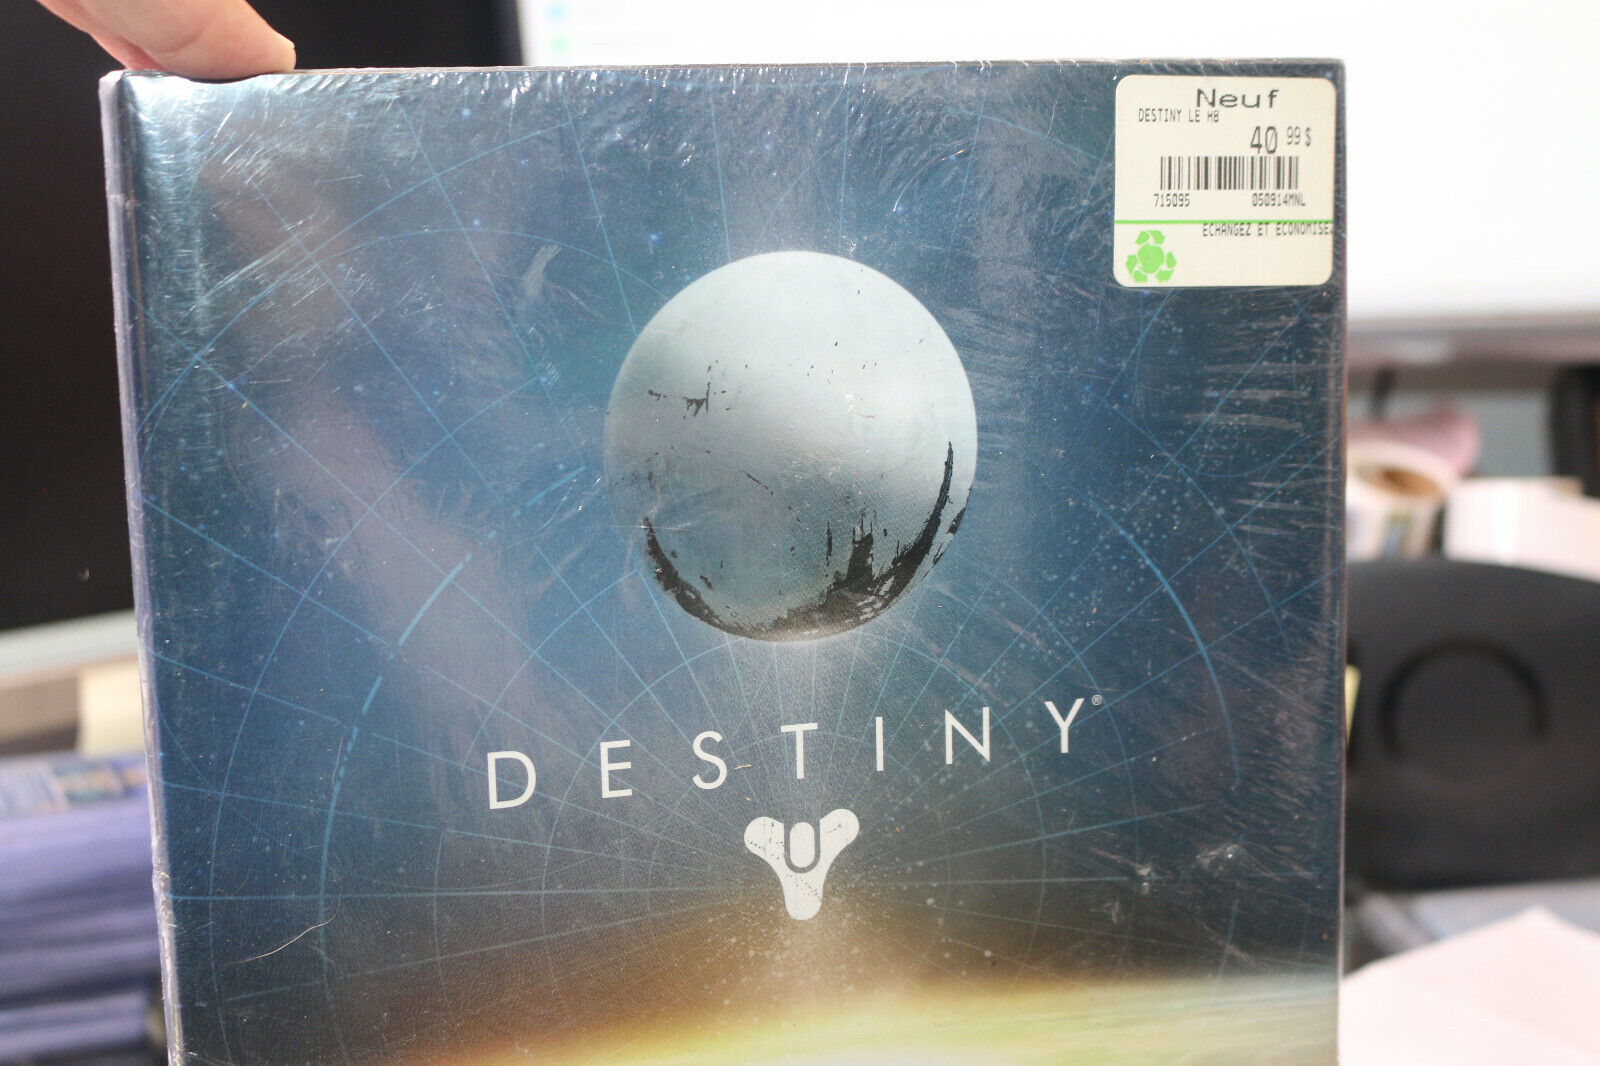 Destiny 2 Complete Strategy Guide